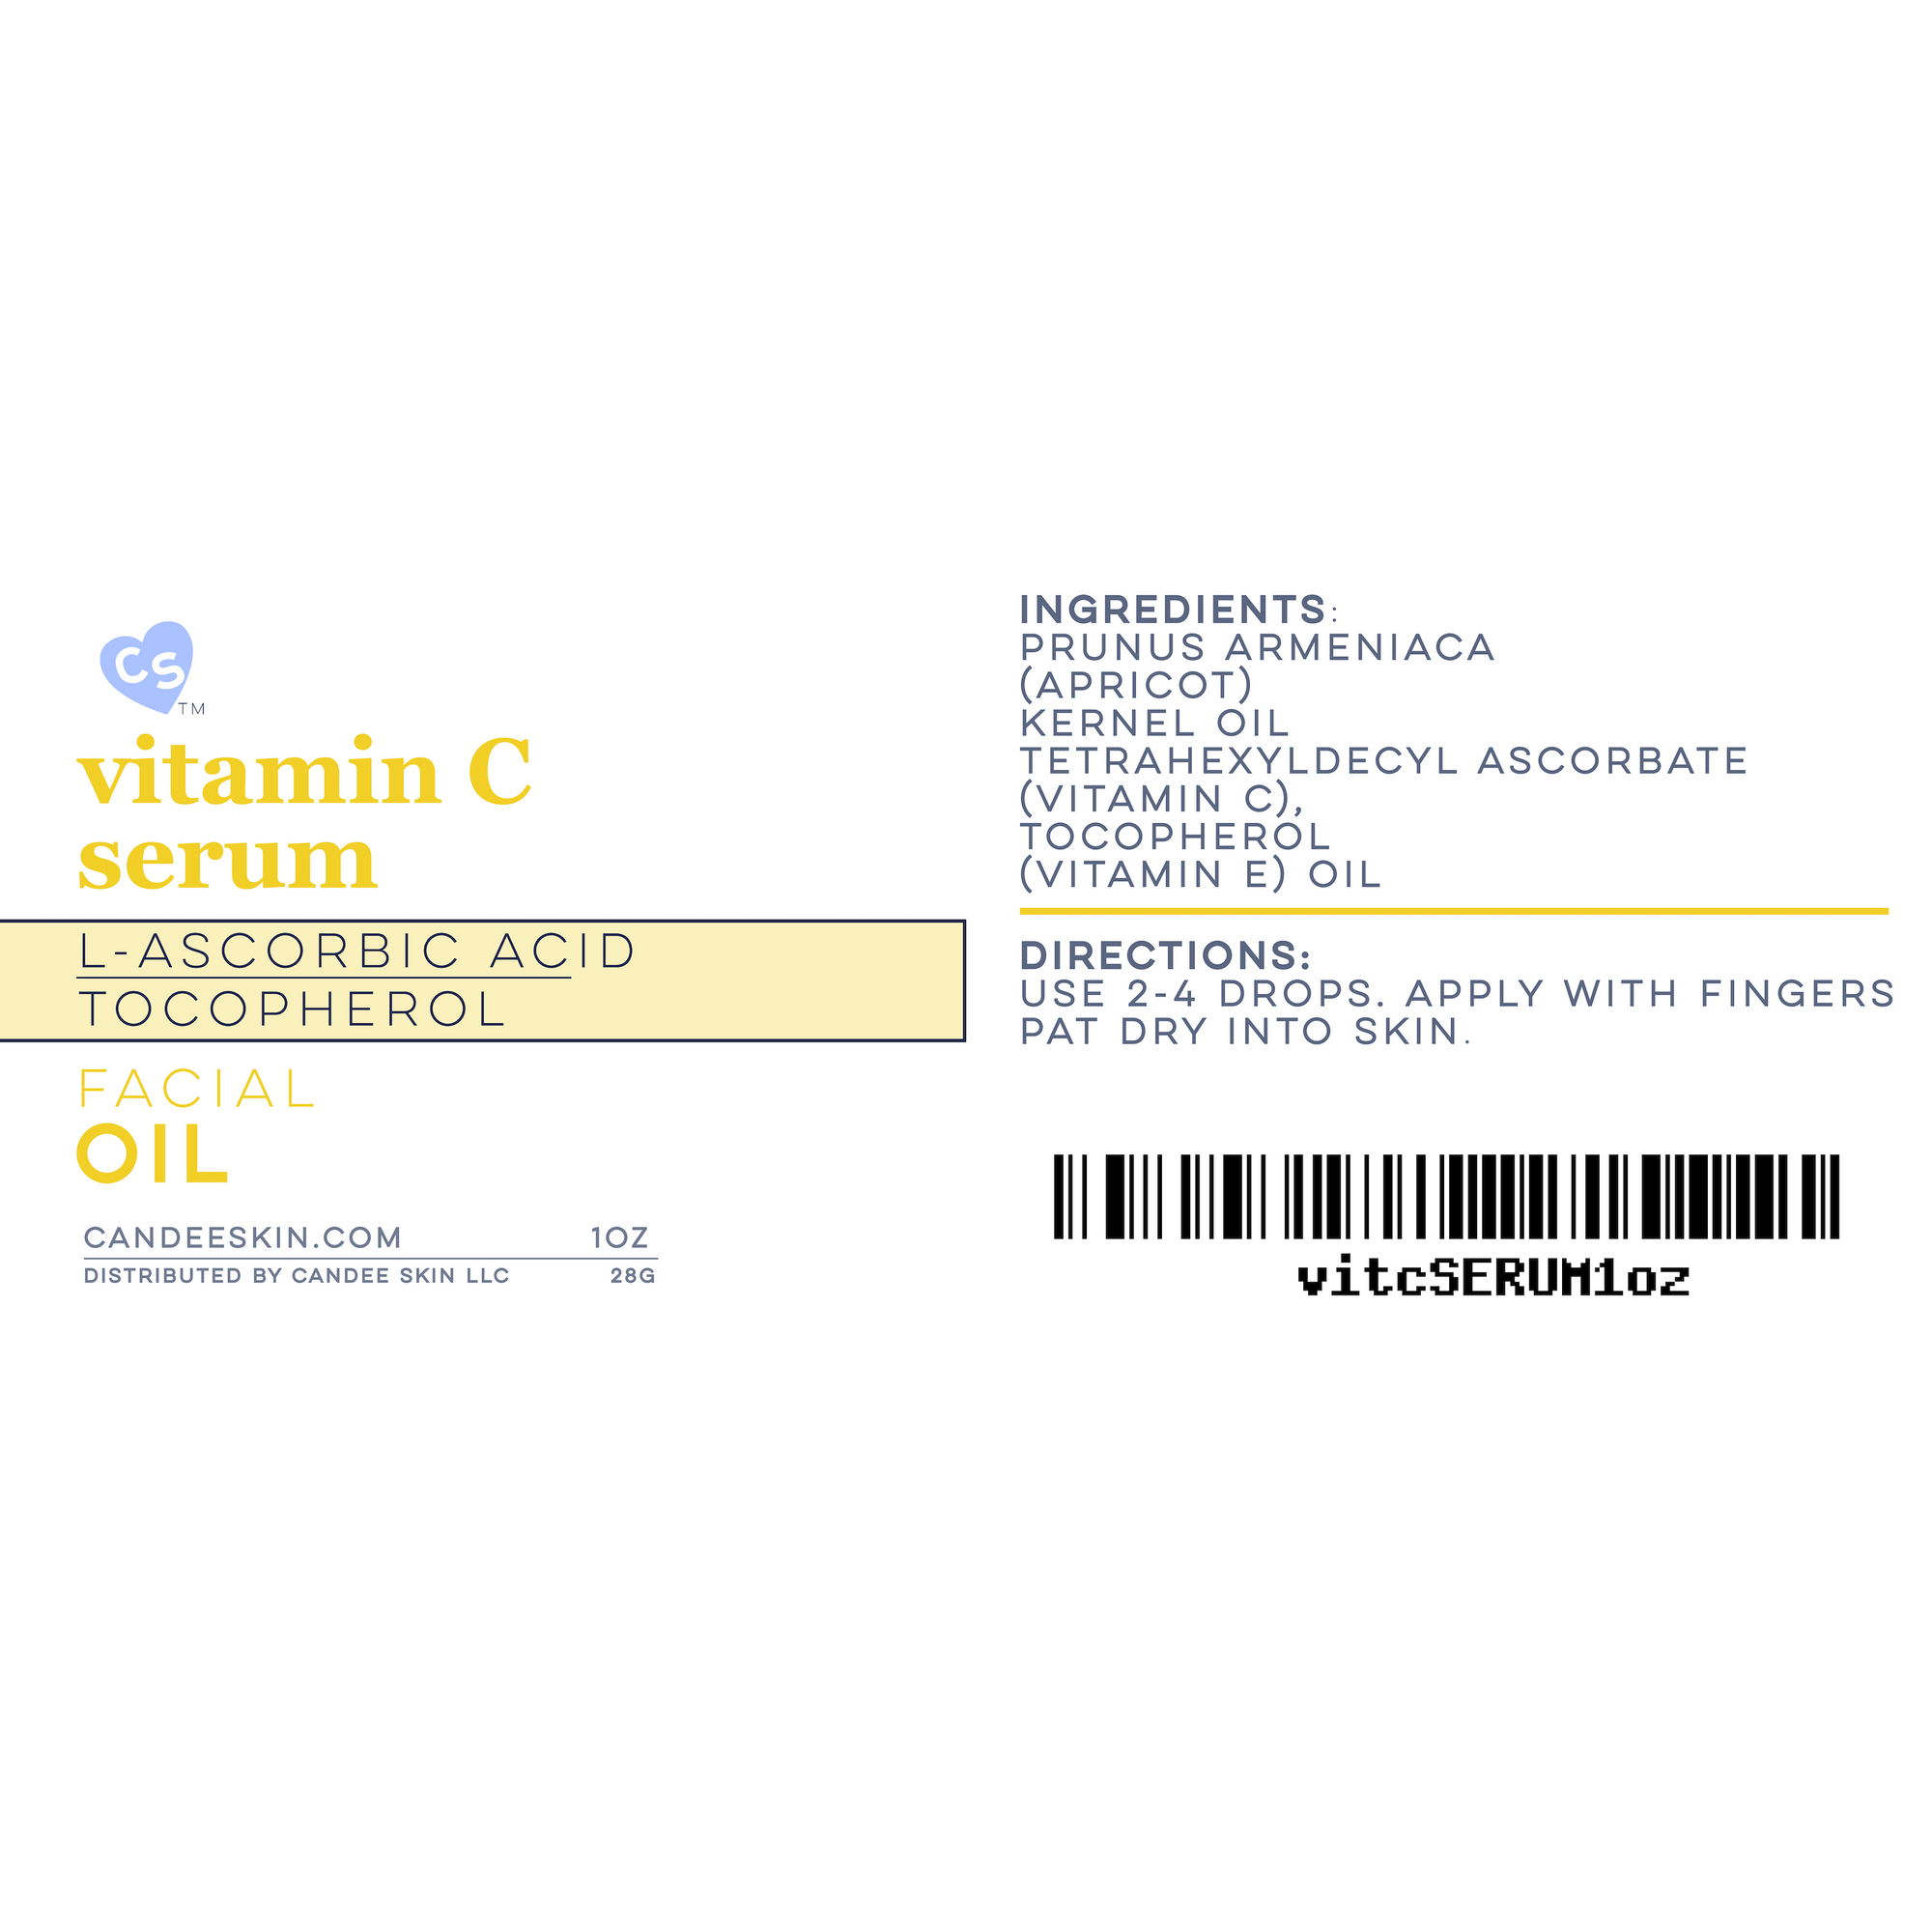 Vitamin C/ Tocopherol Serum Facial Oil. Ingredients and Directions.